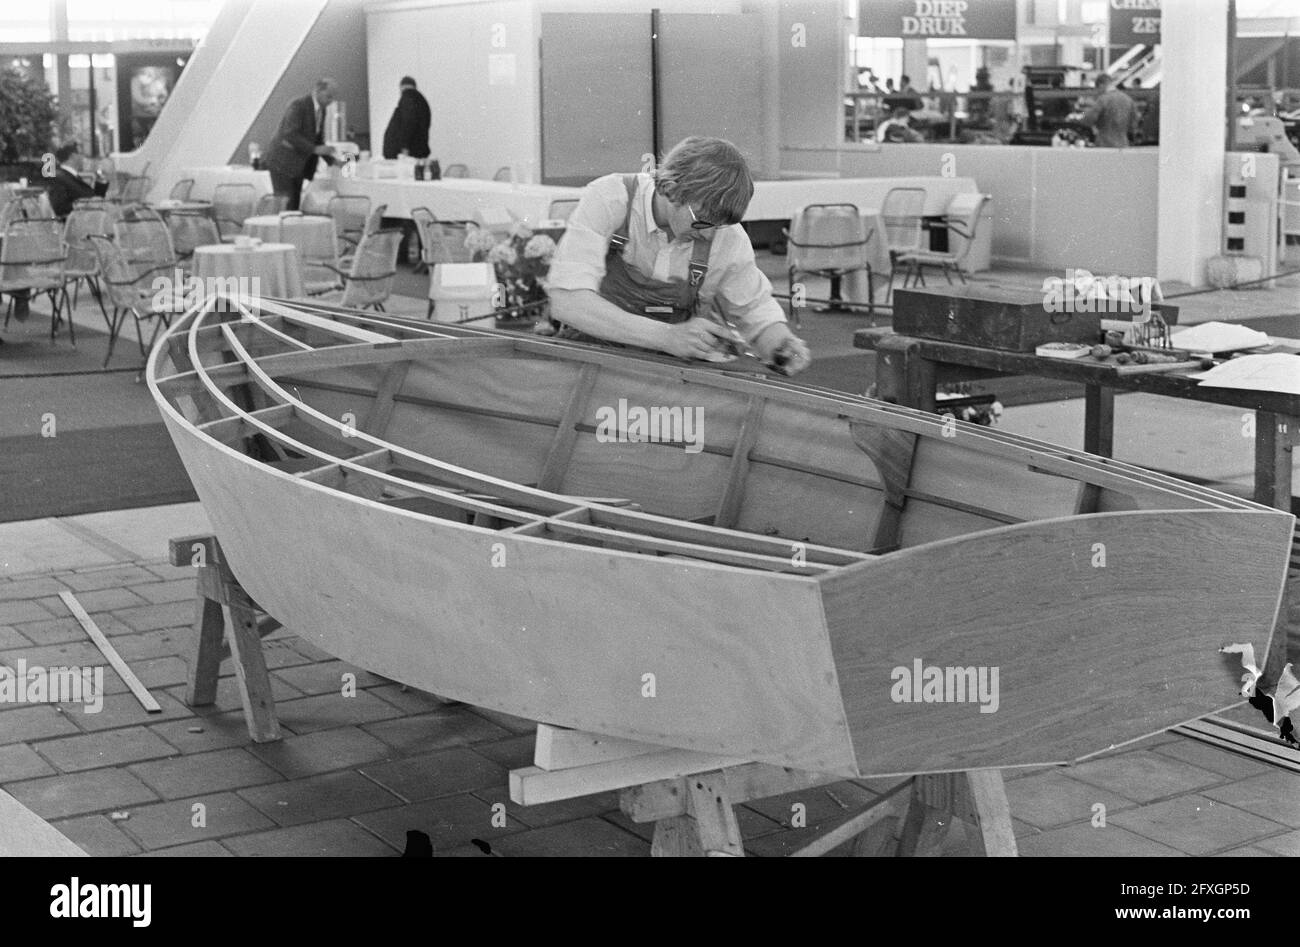 Fifth National Vocational Manifestation in Utrecht, a boat builder at work, May 30, 1967, Vocational Manifestations, The Netherlands, 20th century press agency photo, news to remember, documentary, historic photography 1945-1990, visual stories, human history of the Twentieth Century, capturing moments in time Stock Photo